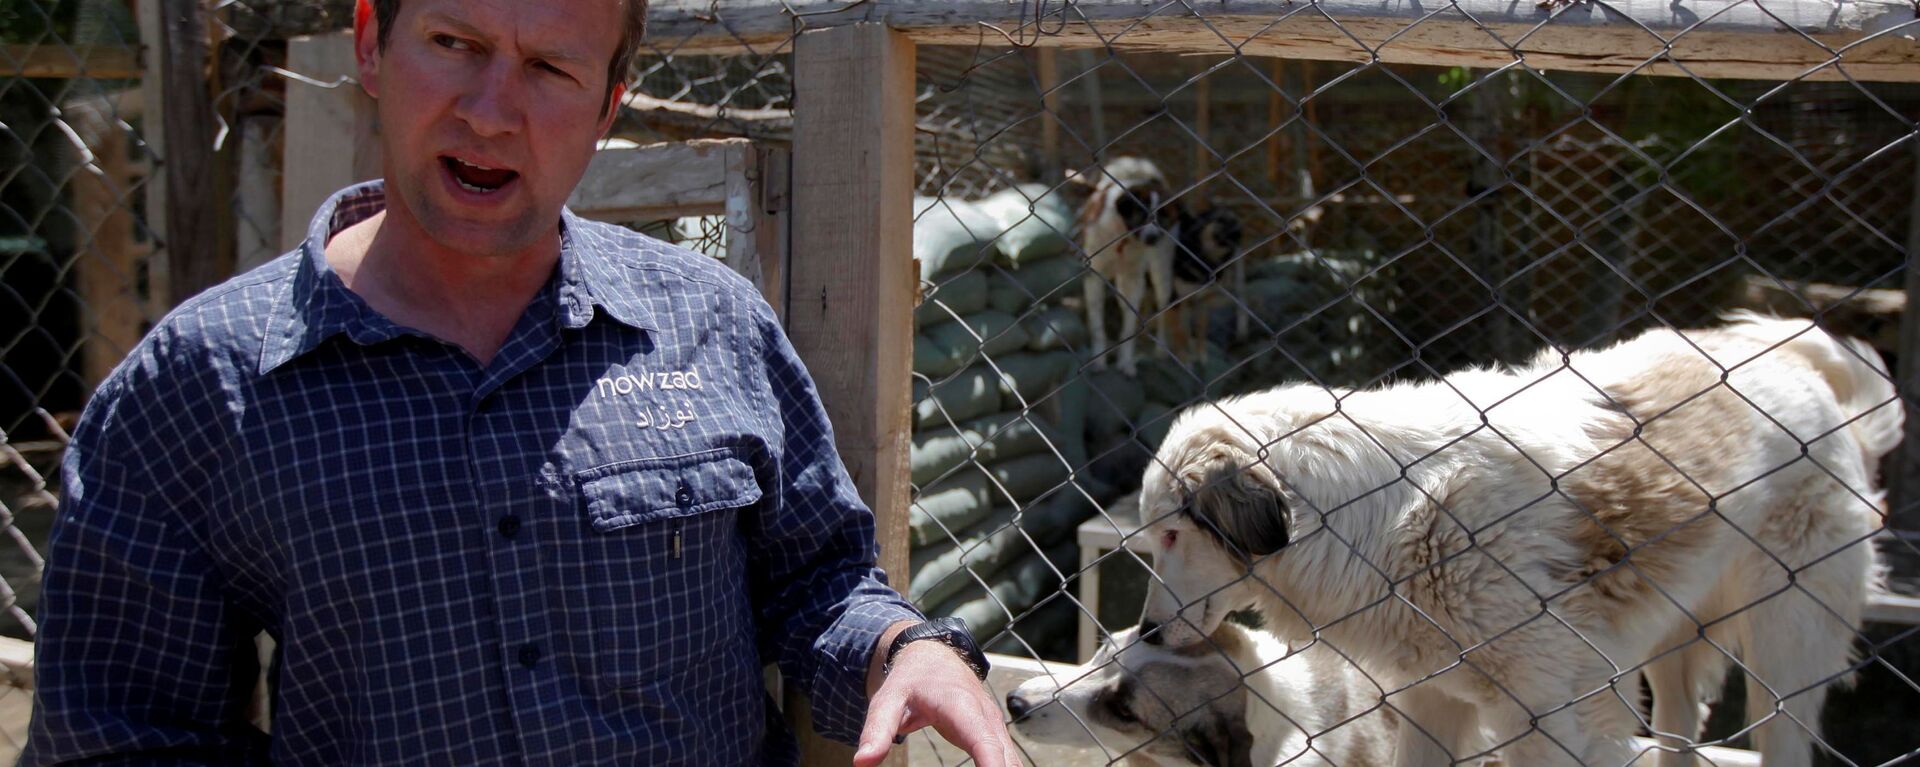 Pen Farthing, founder of British charity Nowzad, an animal shelter, stands in front of a cage on the outskirts of Kabul May 1, 2012. A former Royal Marine, Farthing adopted his dog Nowzad, named after a Helmand district, during his tour there in 2006. He then set up the charity, where dogs and some cats are neutered and vaccinated against rabies before their journeys abroad. Nowzad has given homes to over 330 dogs since it was founded, mostly to soldiers from the U.S. and Britain, but also from South Africa, Australia, Canada and the Netherlands. Picture taken May 1, 2012. - Sputnik International, 1920, 29.08.2021